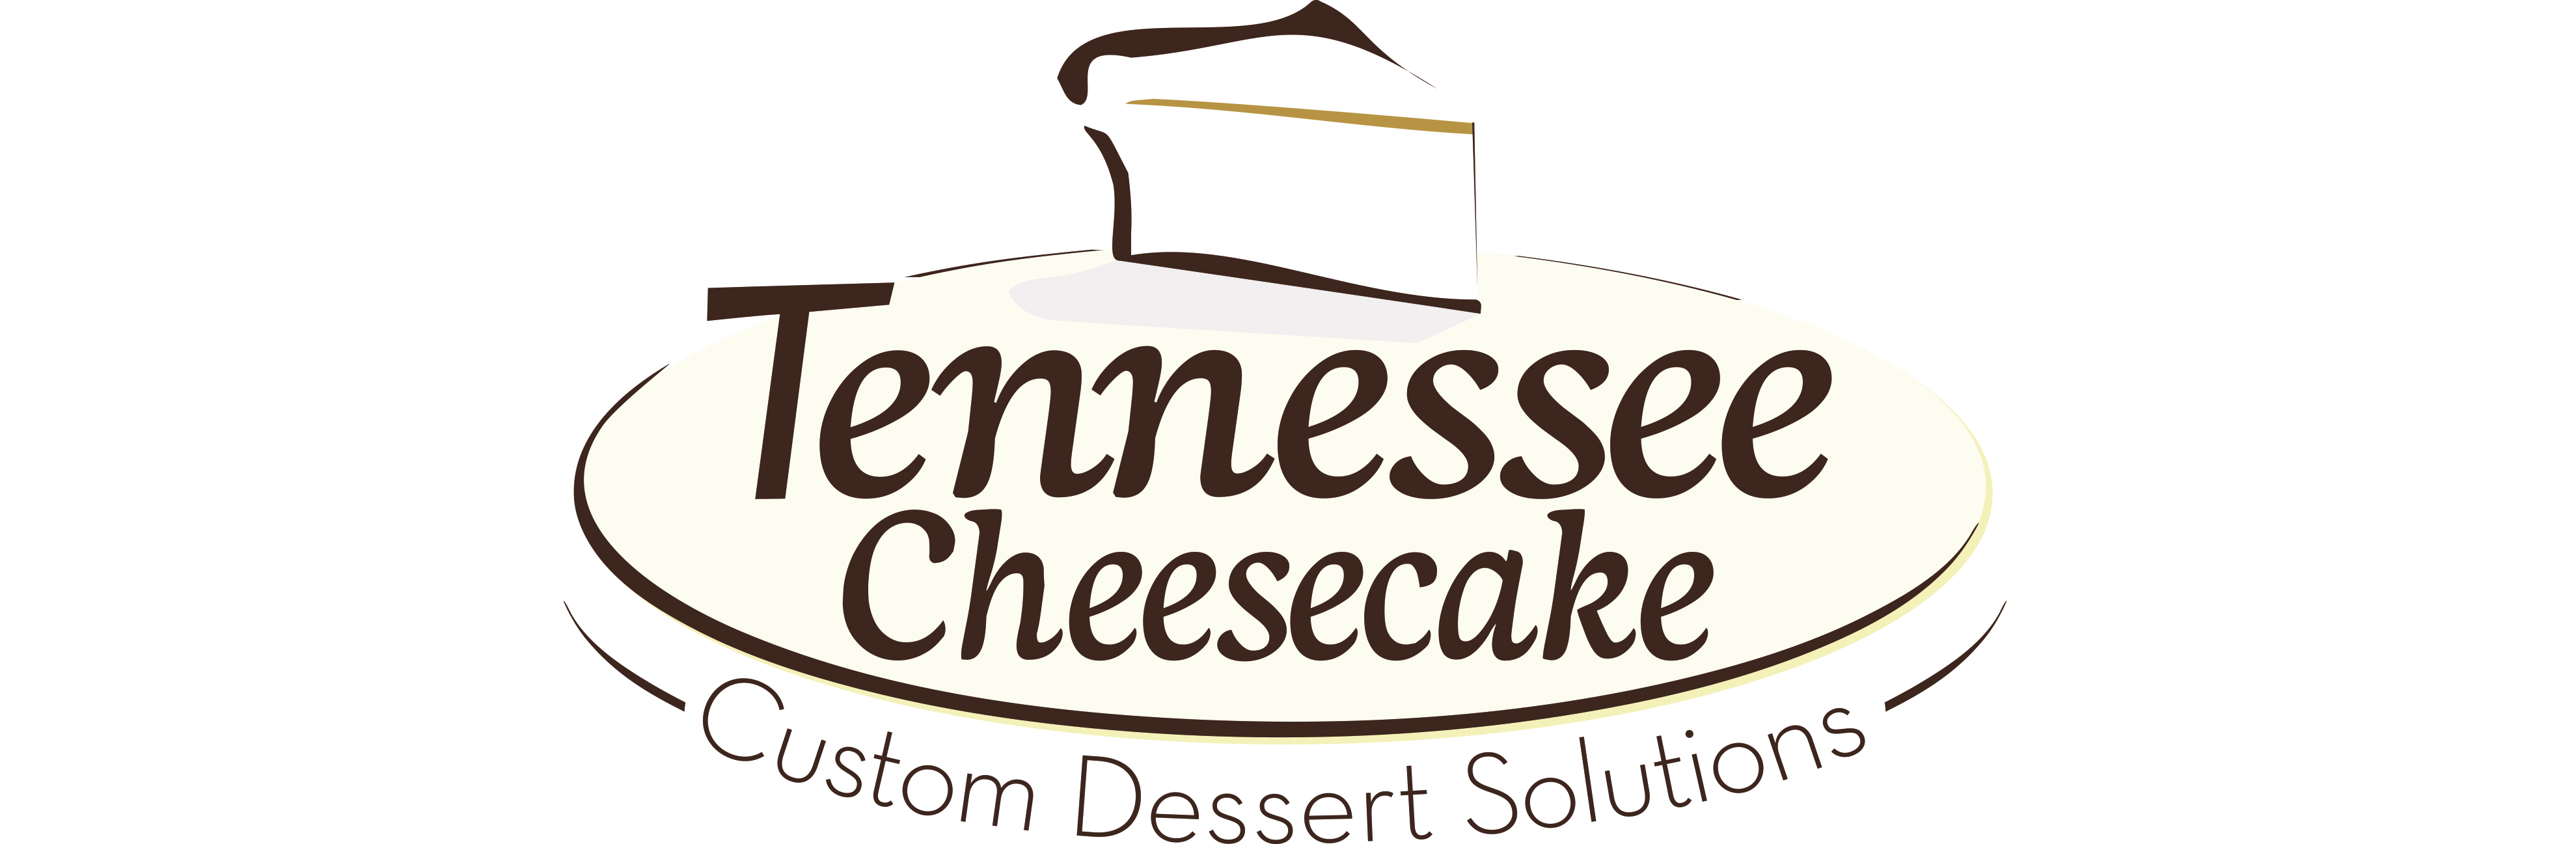 Tennessee Cheesecake Factory